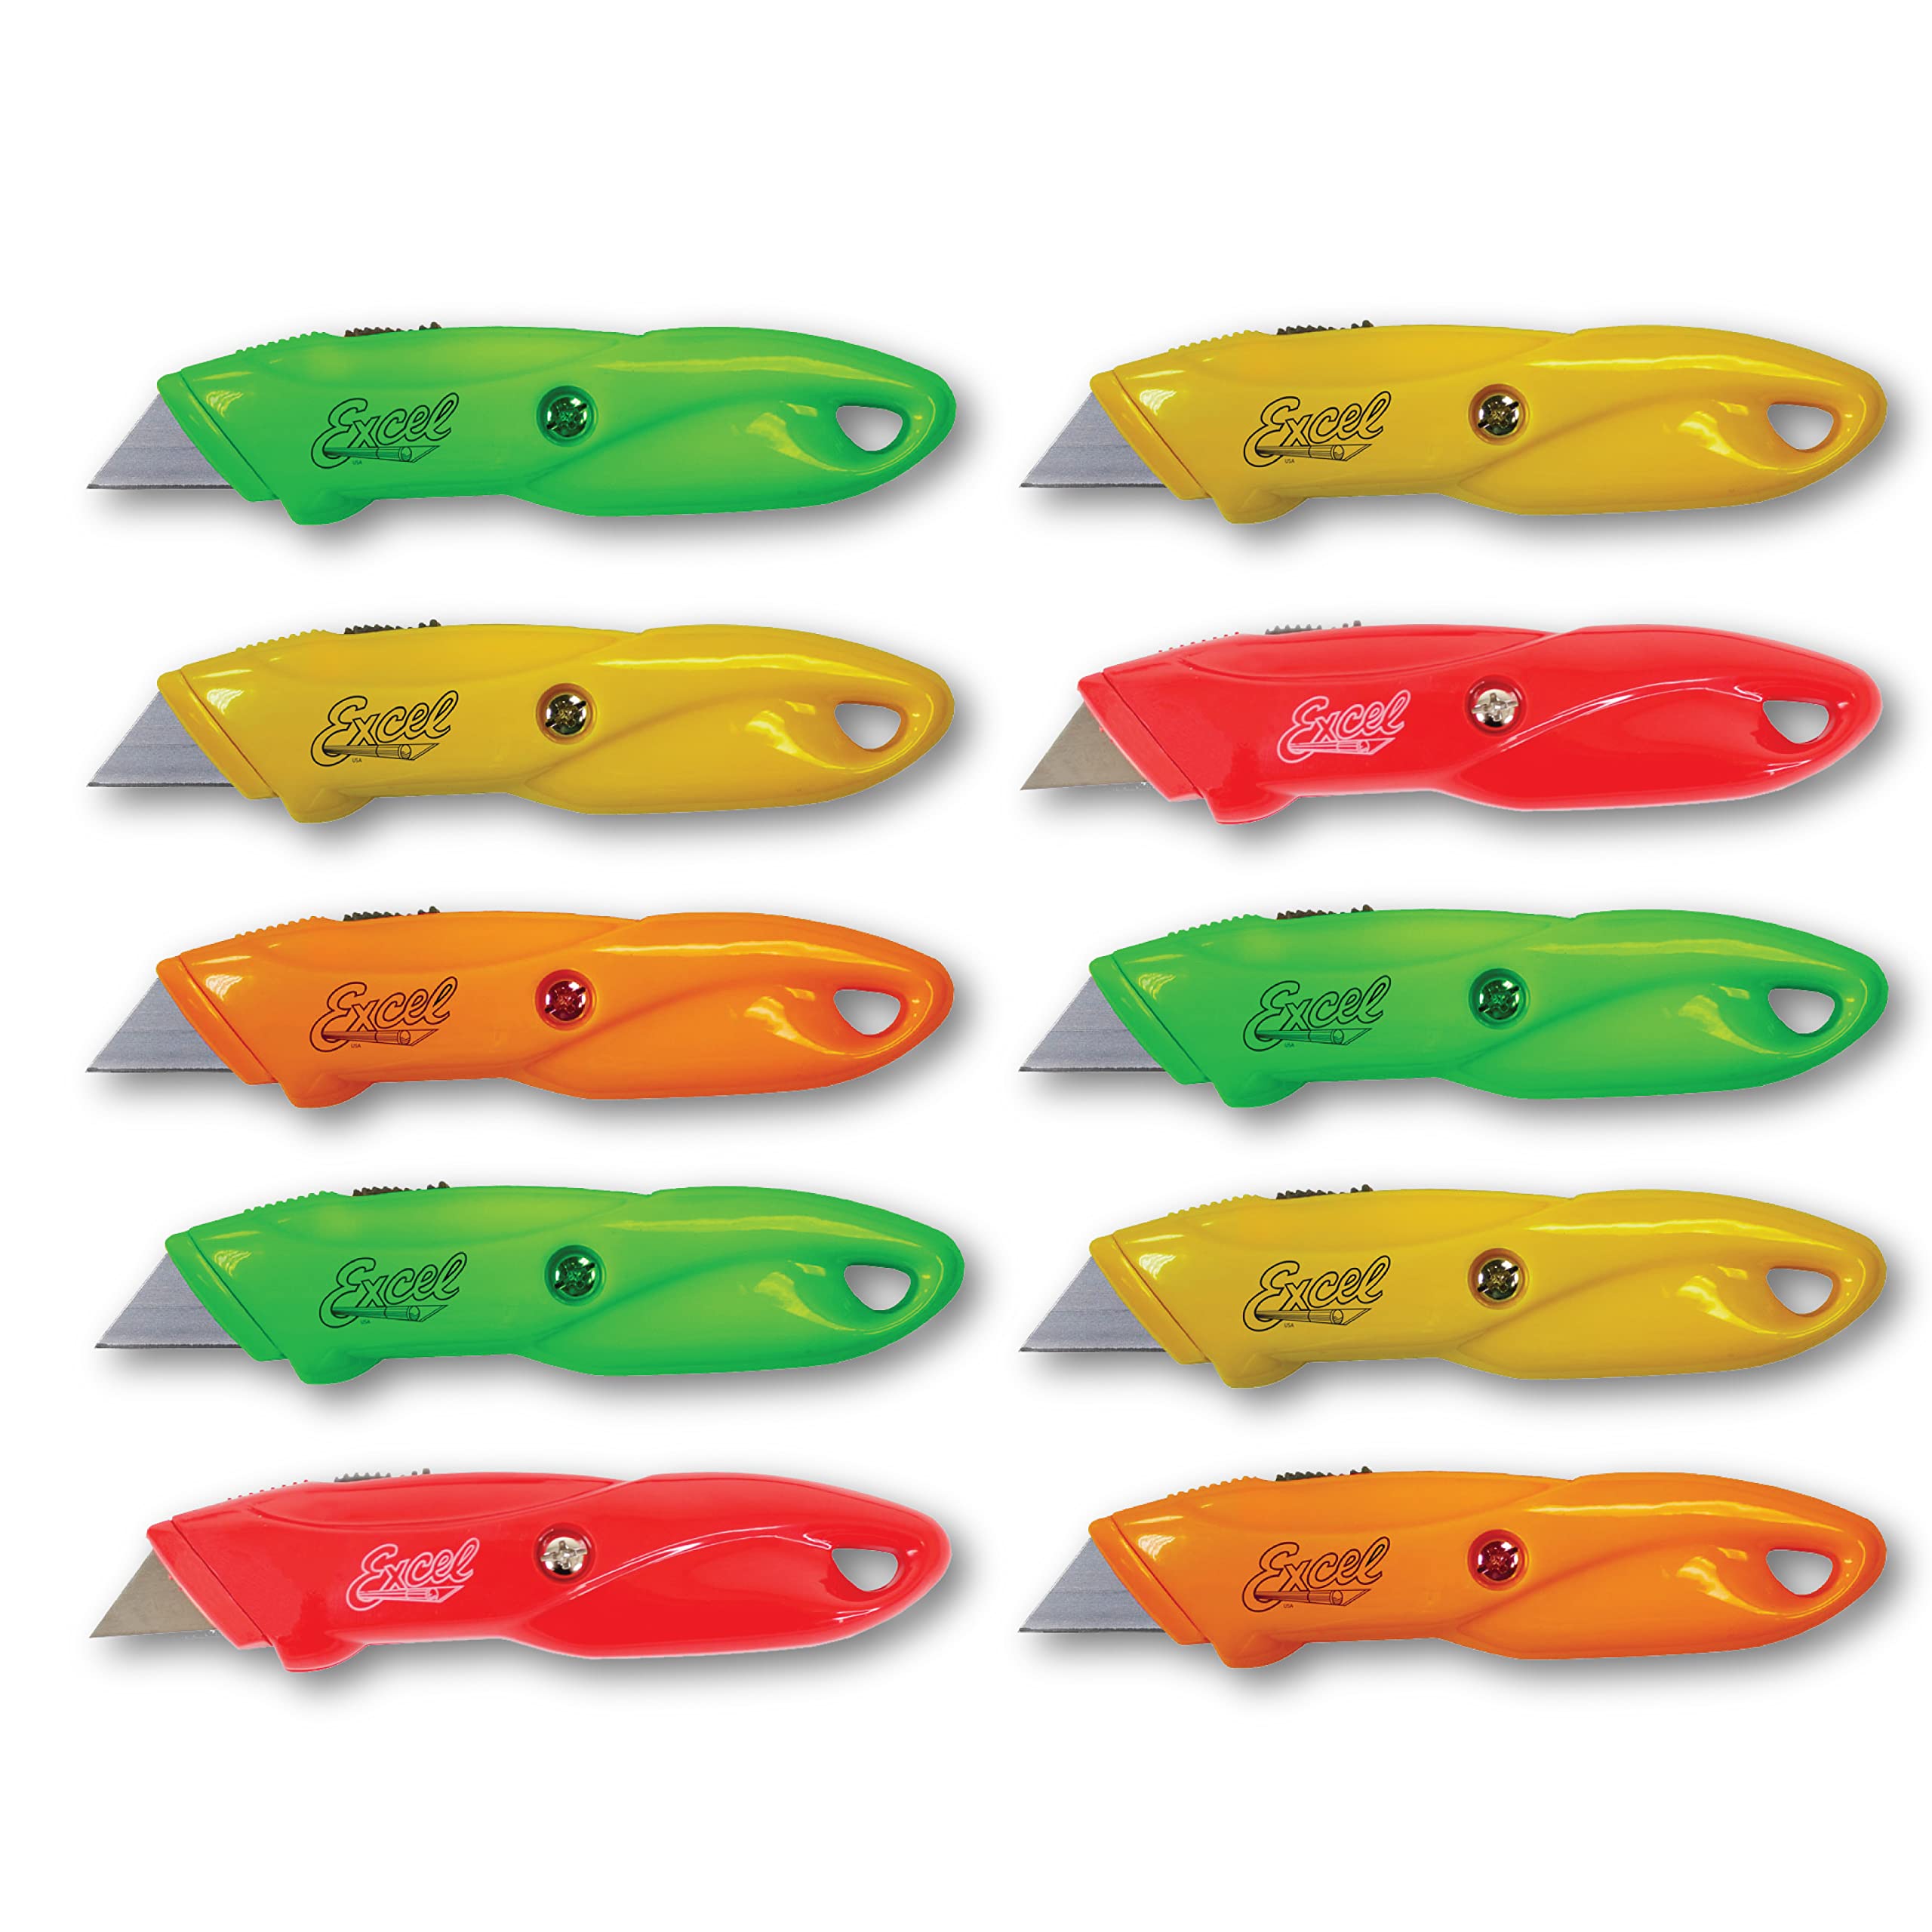 Excel Blade Box Cutters Retractable Pack - 10 Pc Box Cutters Bulk pack - Retracting Box Cutter - Assorted Box Cutters for Cutting Boxes, Cartons, Cardboard and More - Assorted Colors